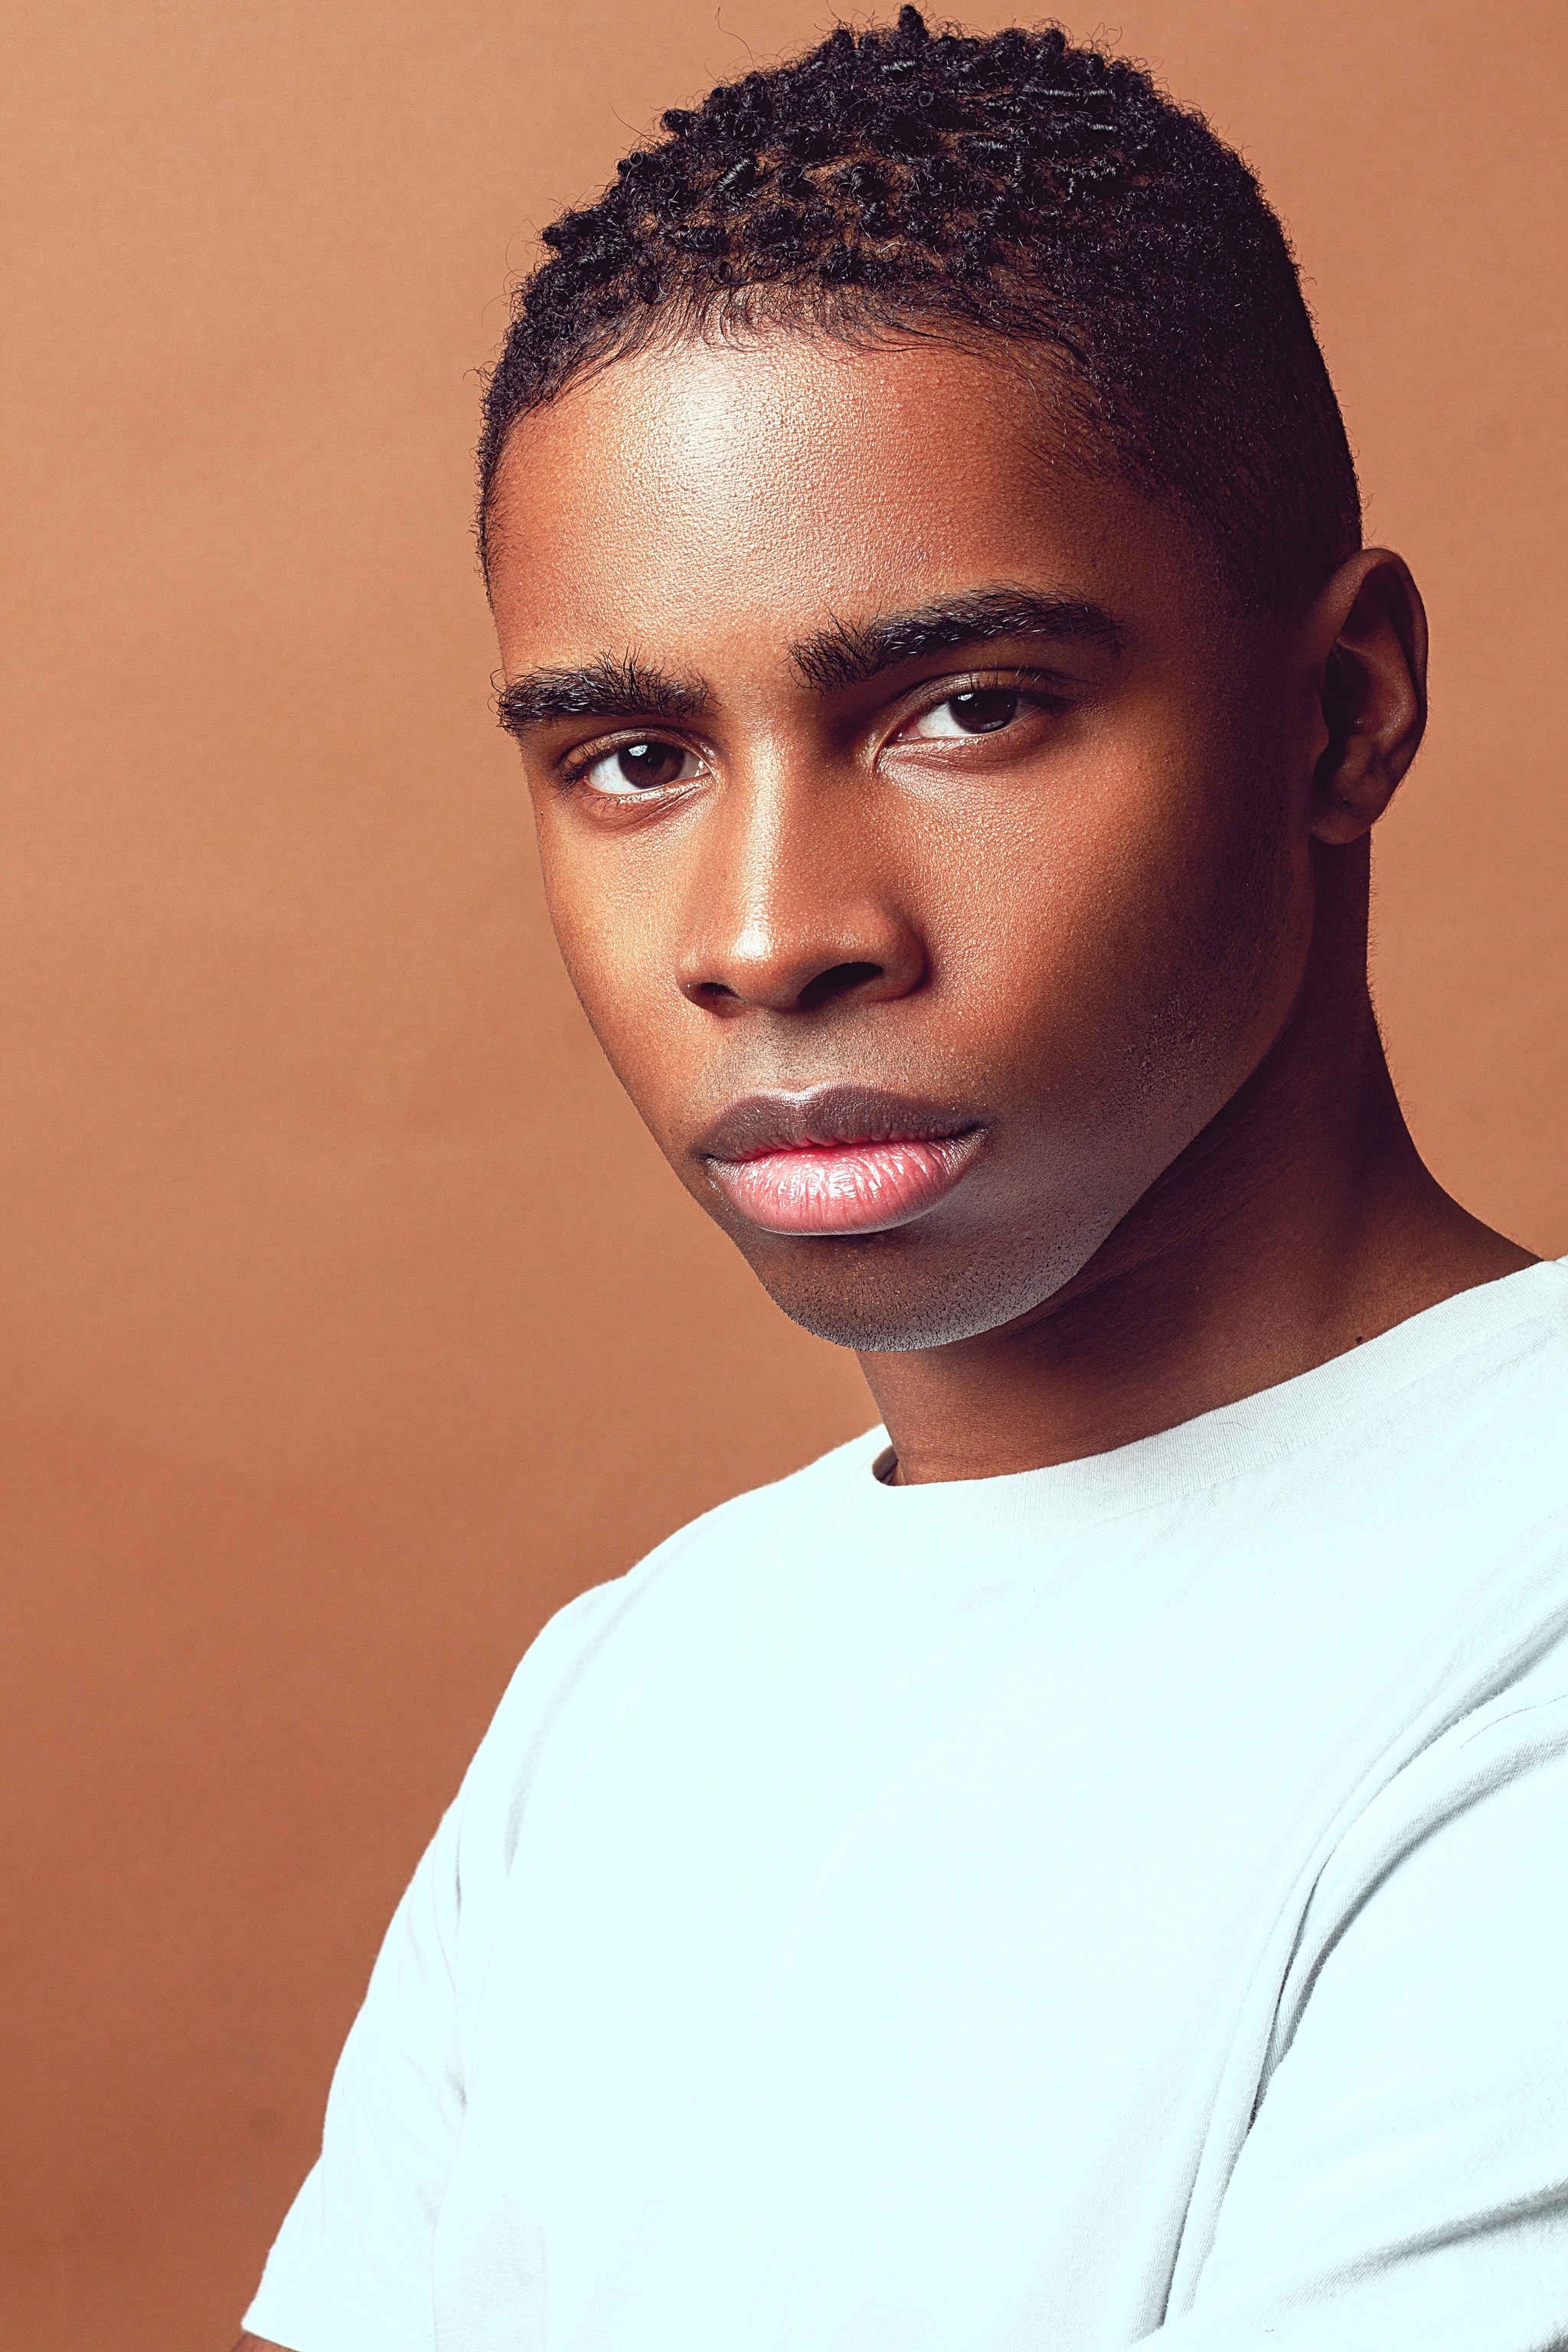 A portrait of singer Manny Dunn who looks seriously at the camera. He wears a pale blue shirt and poses against a light brown backdrop.